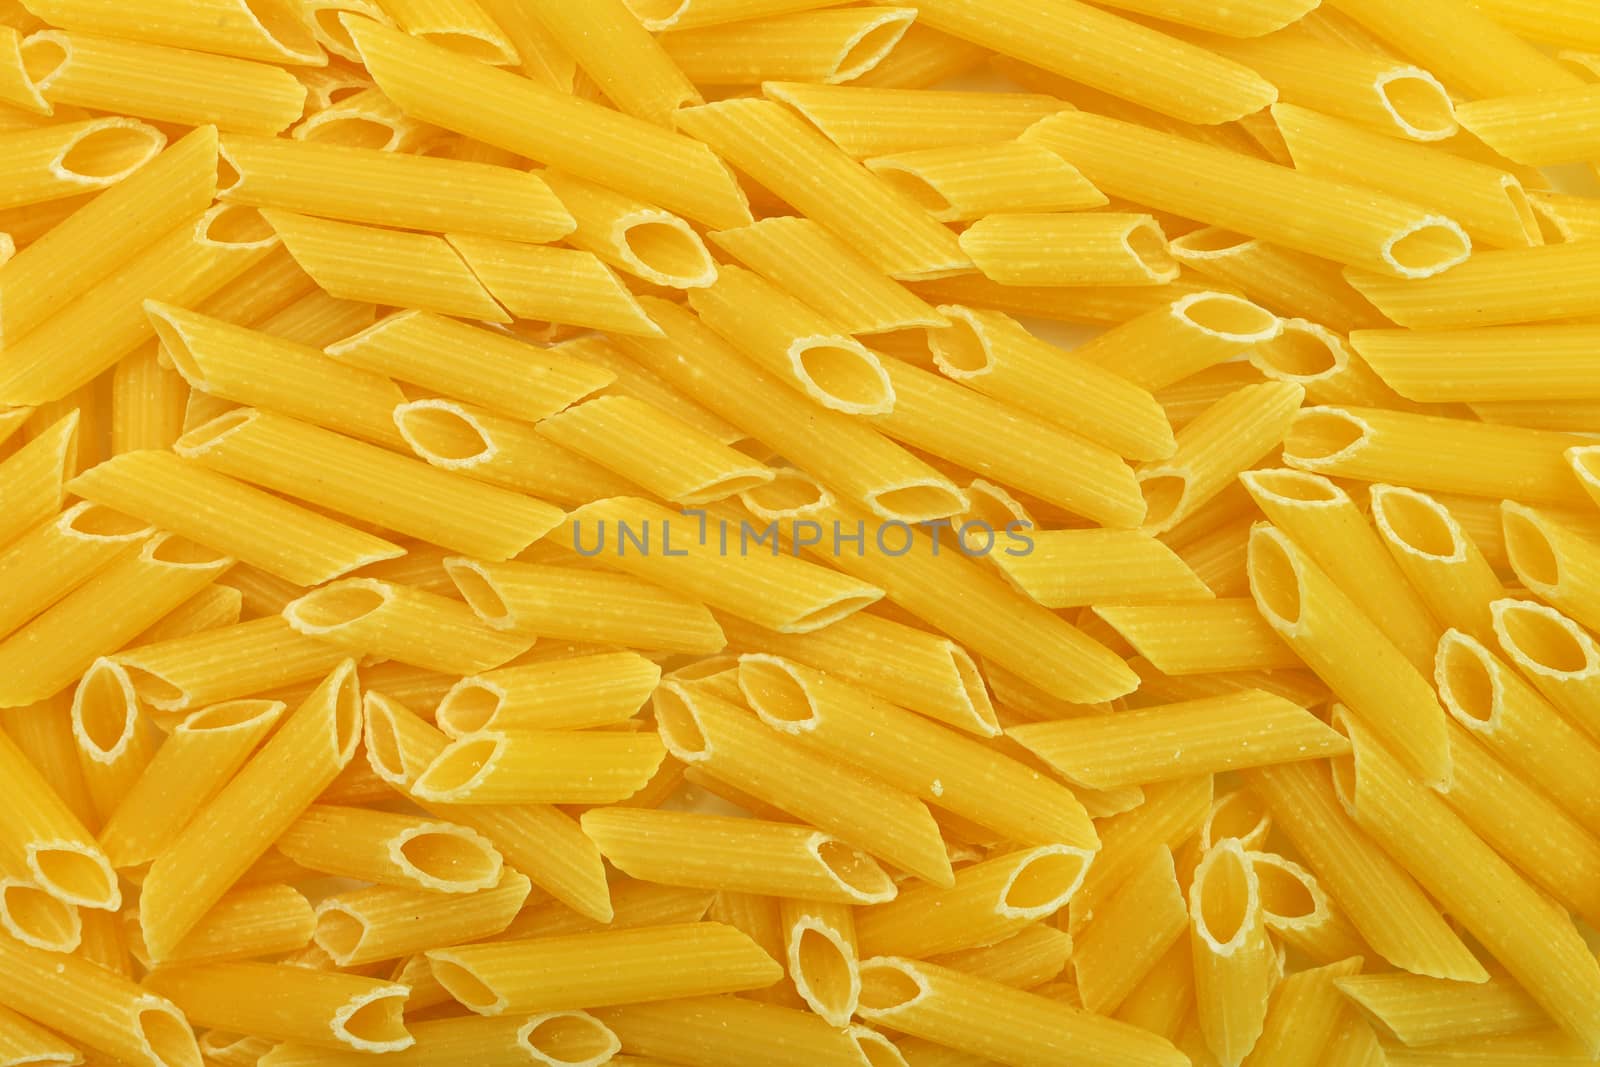 Penne pasta dry feathers food texture pattern